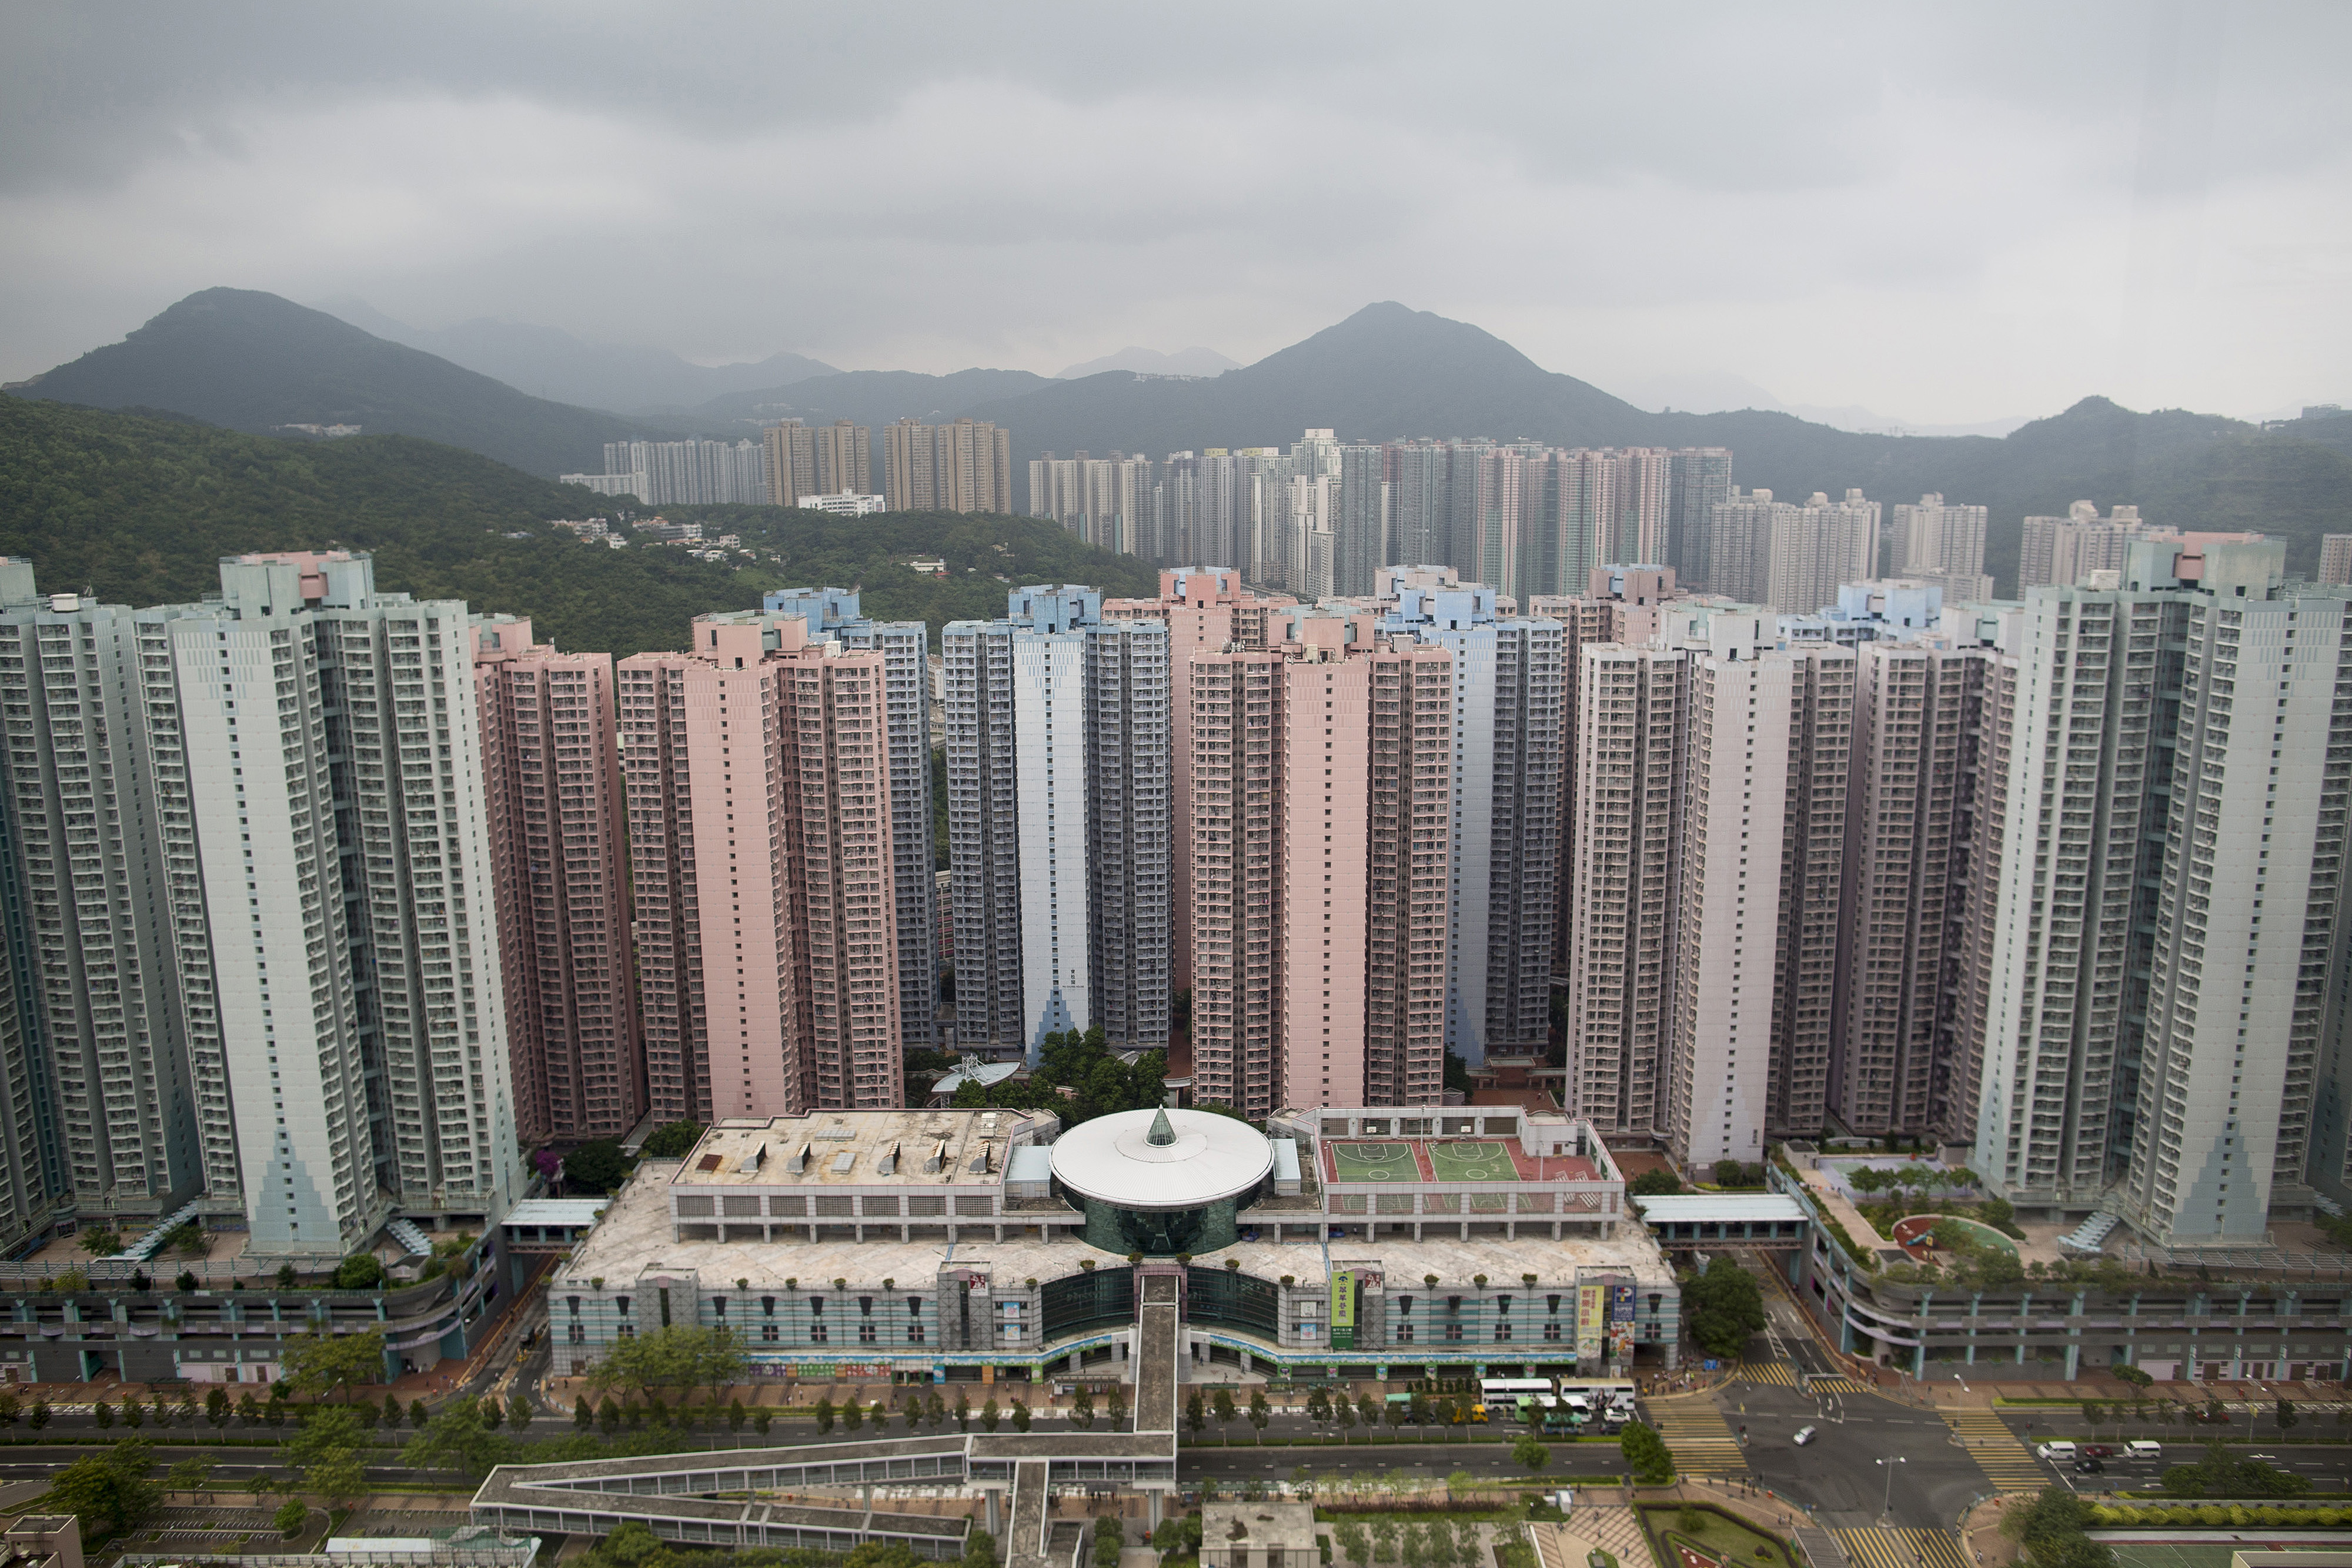 Tseung Kwan O residents are fighting for access to their tennis court. Photo: Bloomberg